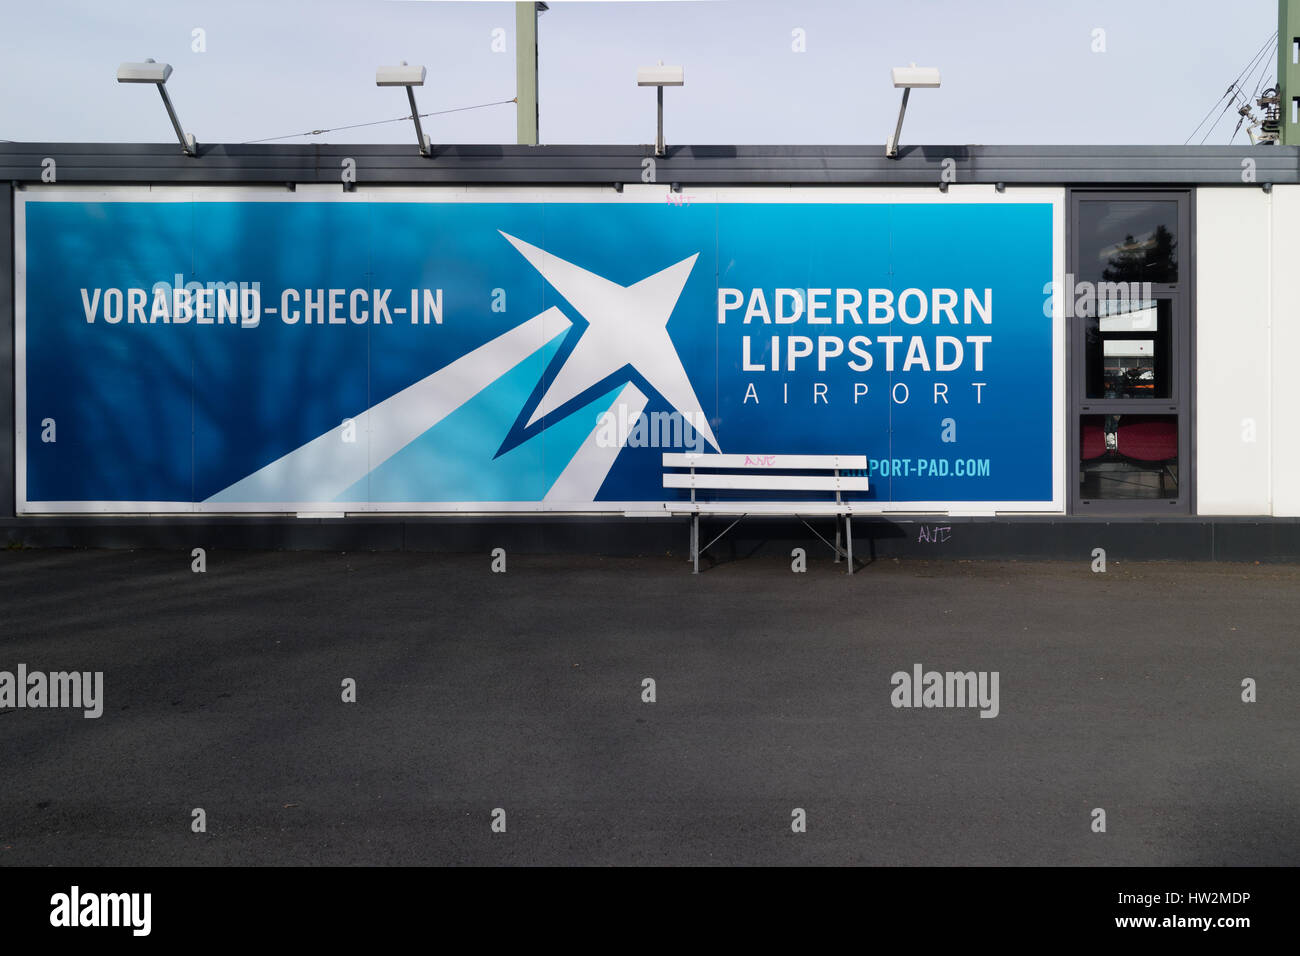 Sign at Bielefeld remote check-in for Paderborn-Lippstadt Airport, Germany Stock Photo